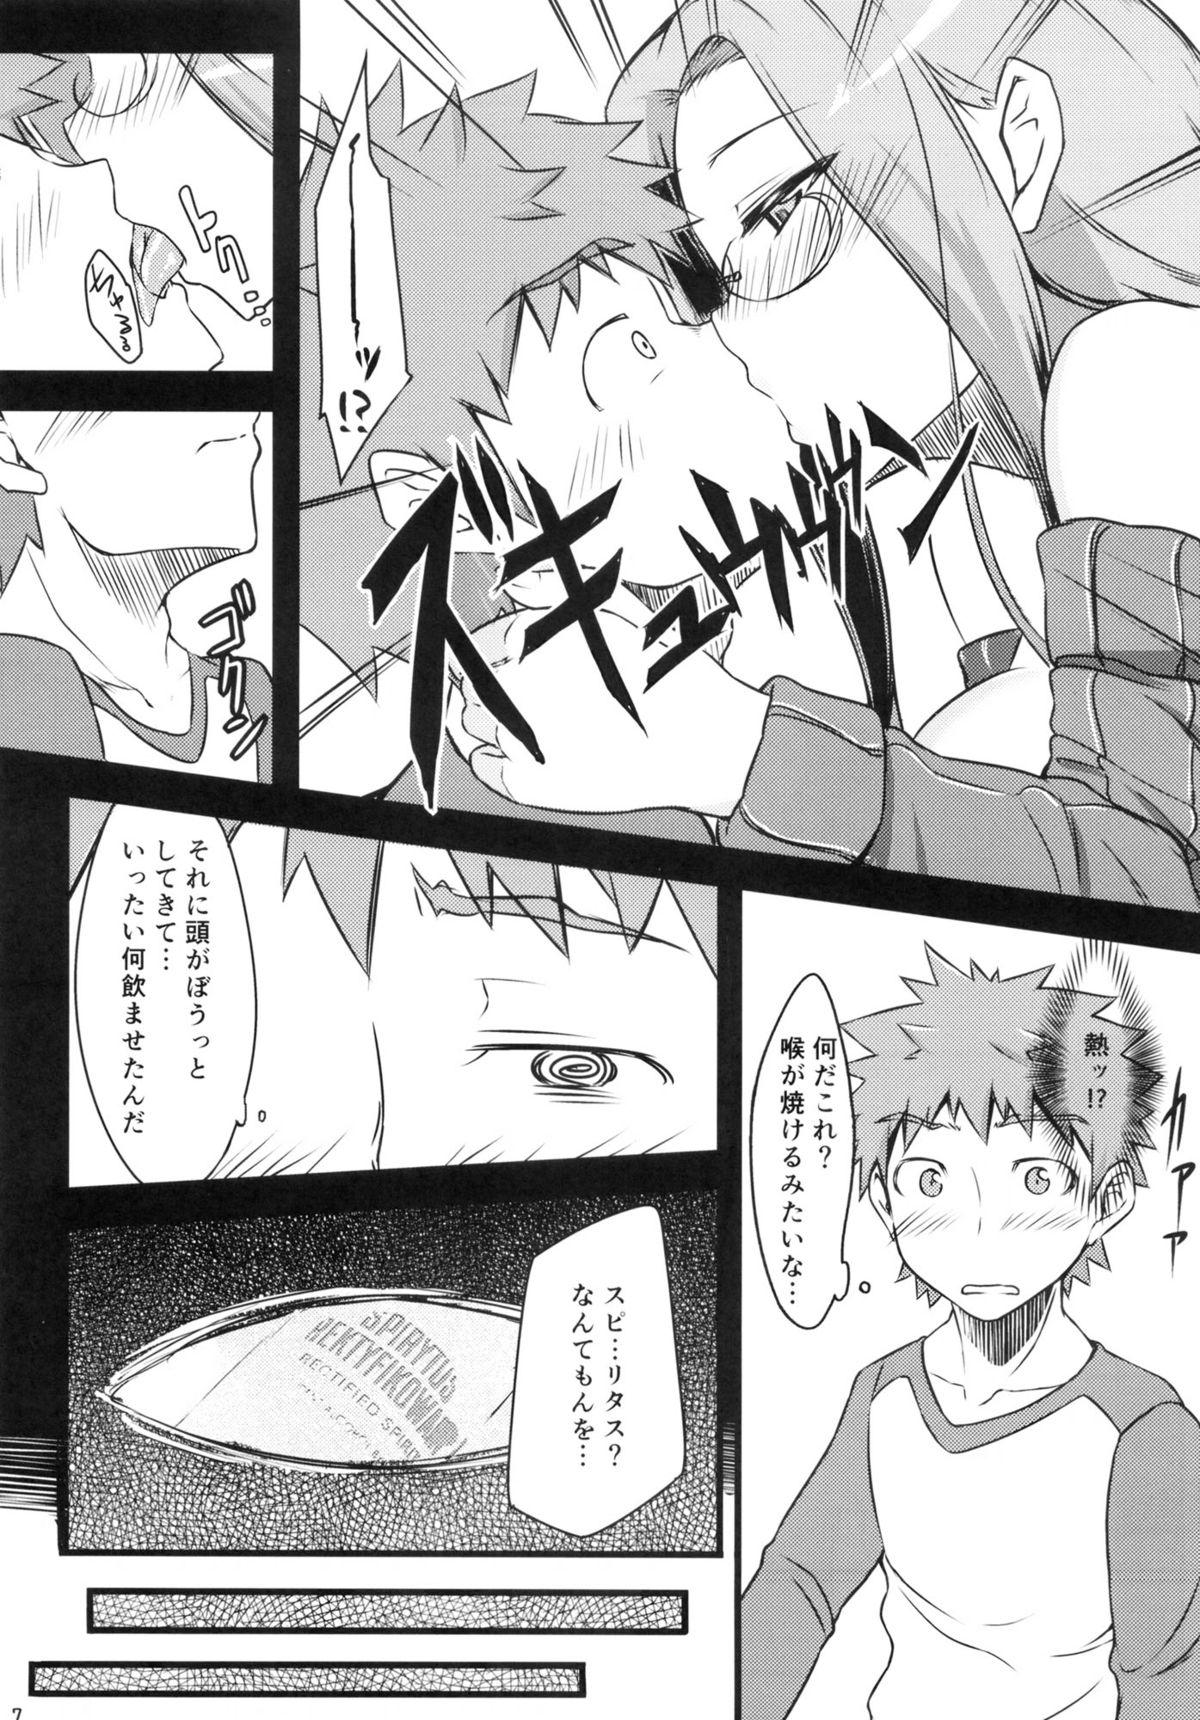 Audition R7 - Fate stay night Fate hollow ataraxia Spank - Page 6